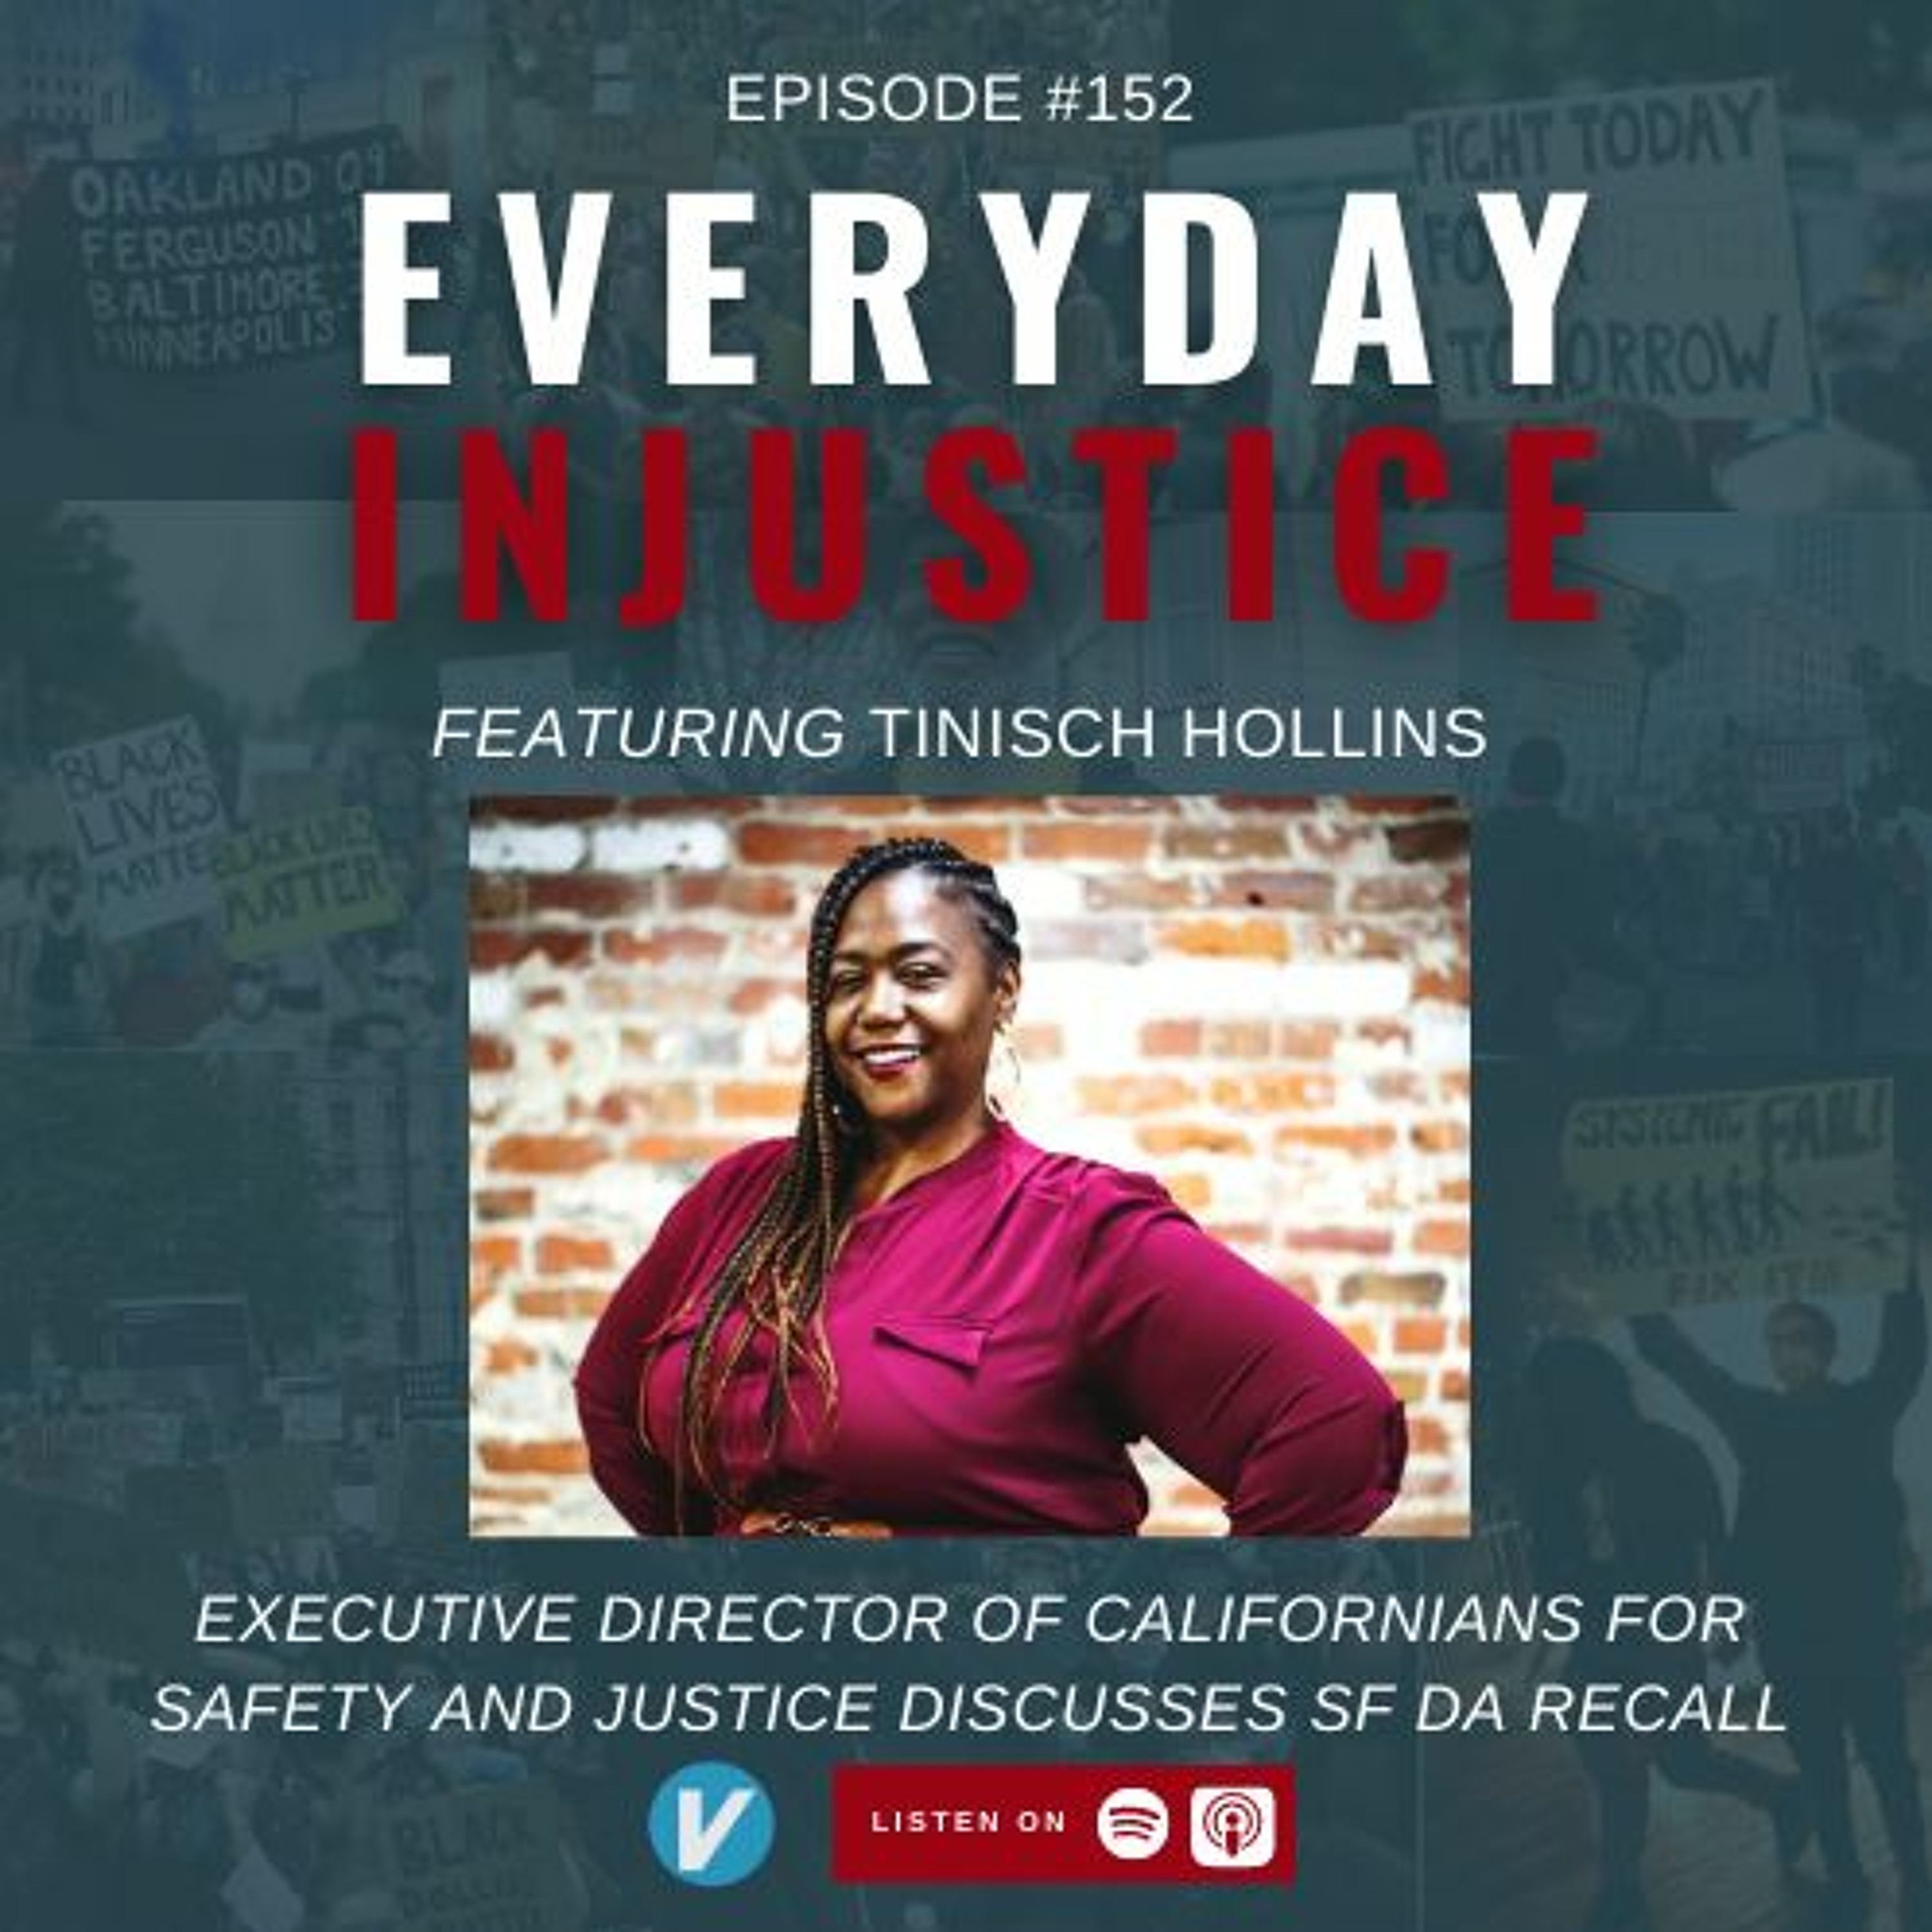 Everyday Injustice Podcast Episode 152: Tinisch Hollins on the Chesa Boudin and SF Recall